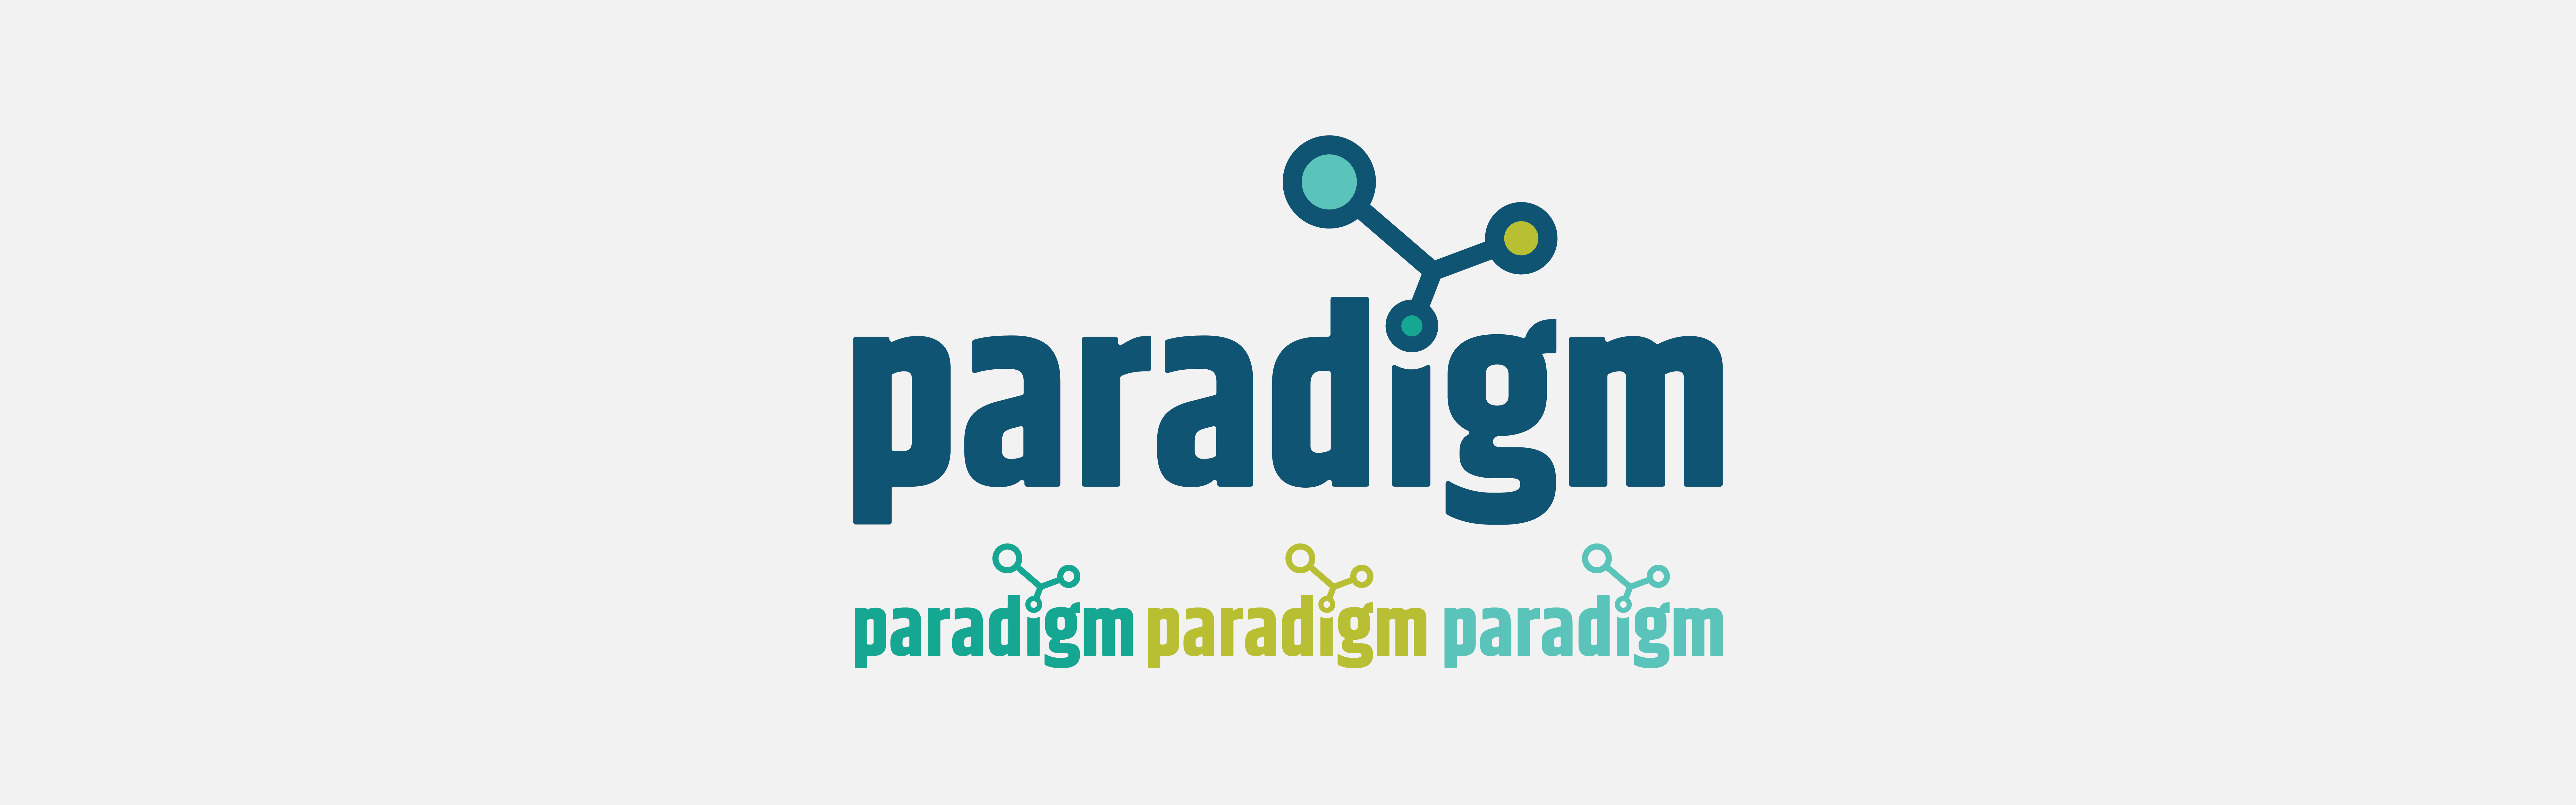 The image shows the word "Paradigm Data Group" in various sizes and one stylized version with a design that suggests a connected network or molecular structure, symbolizing complexity or interconnectedness.